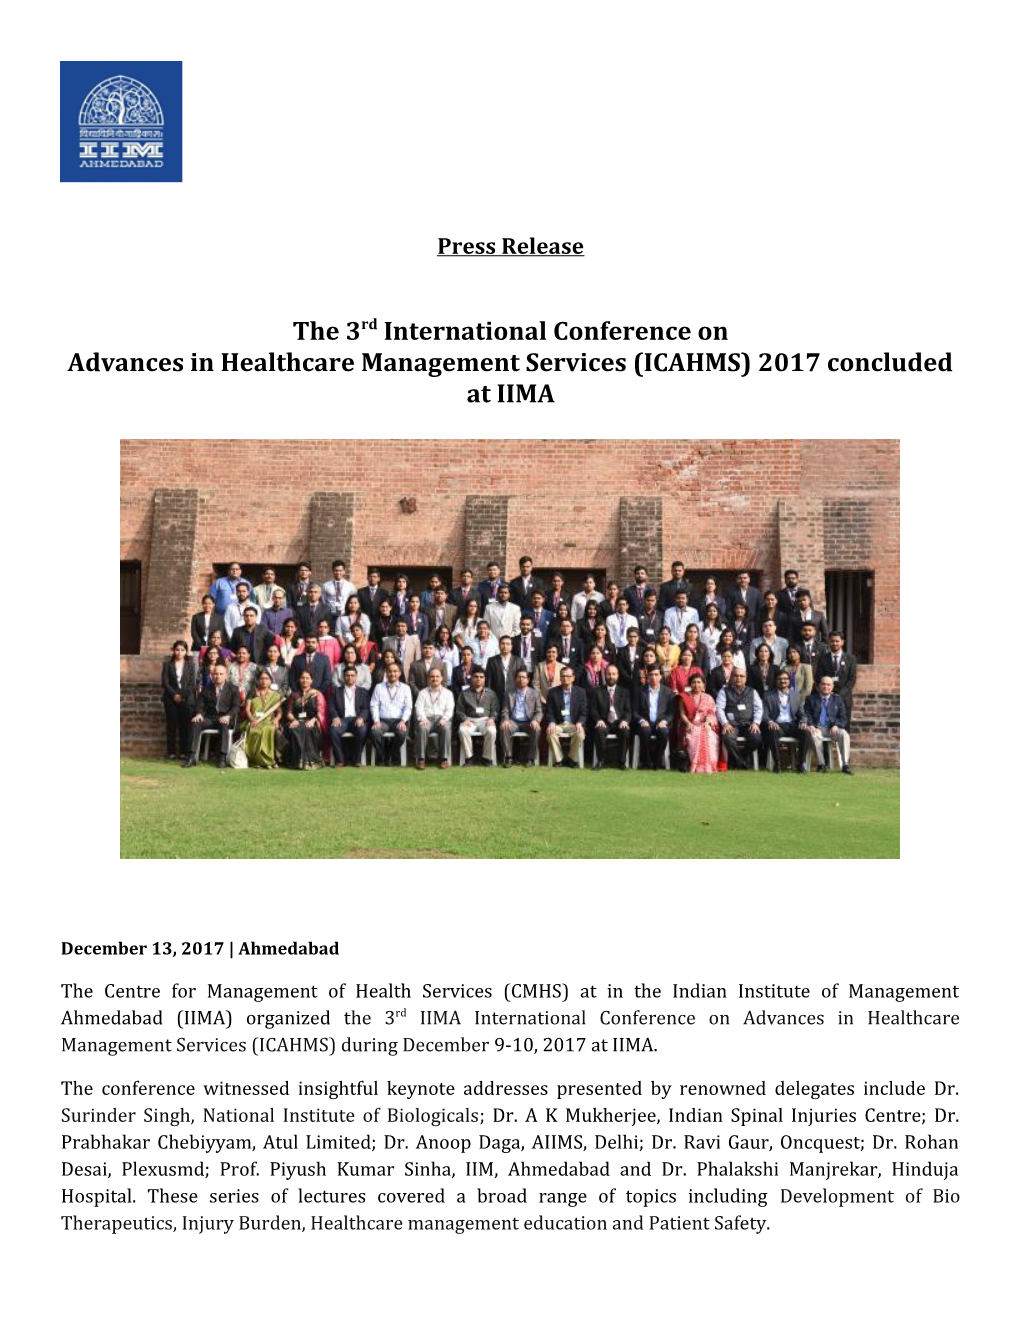 Advances in Healthcare Management Services (ICAHMS) 2017 Concluded at IIMA